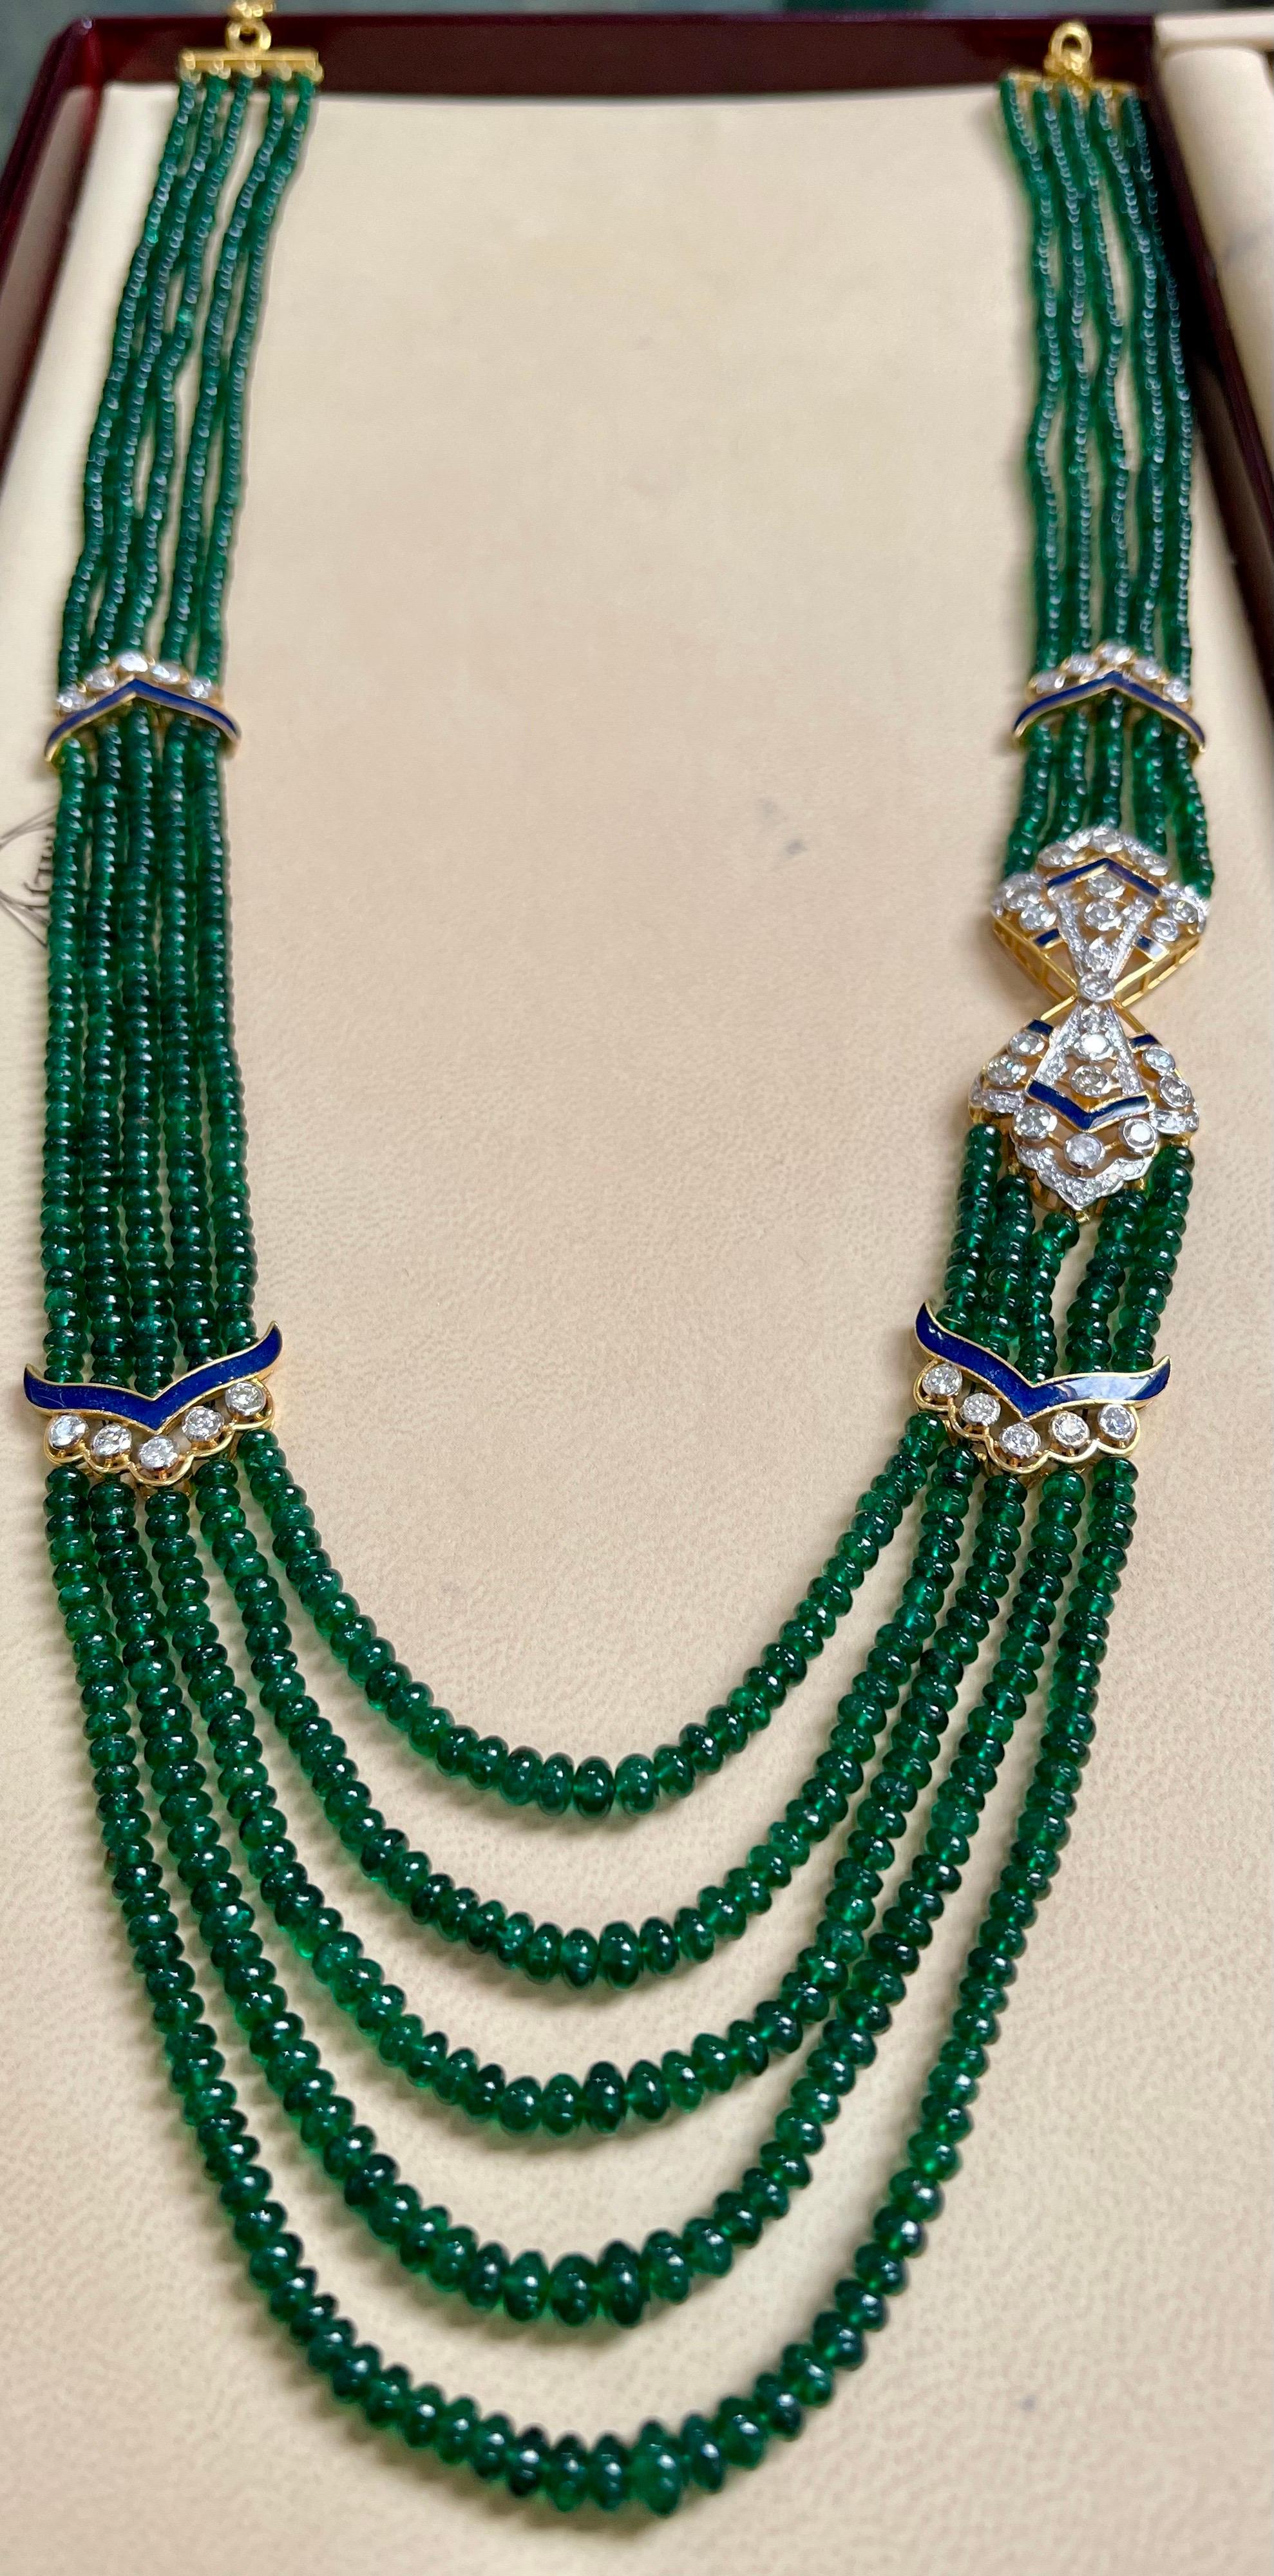 300 Carat 5-Strand Emerald Necklace with 4.8 Carat Diamond & Enamel in 14k Gold For Sale 4